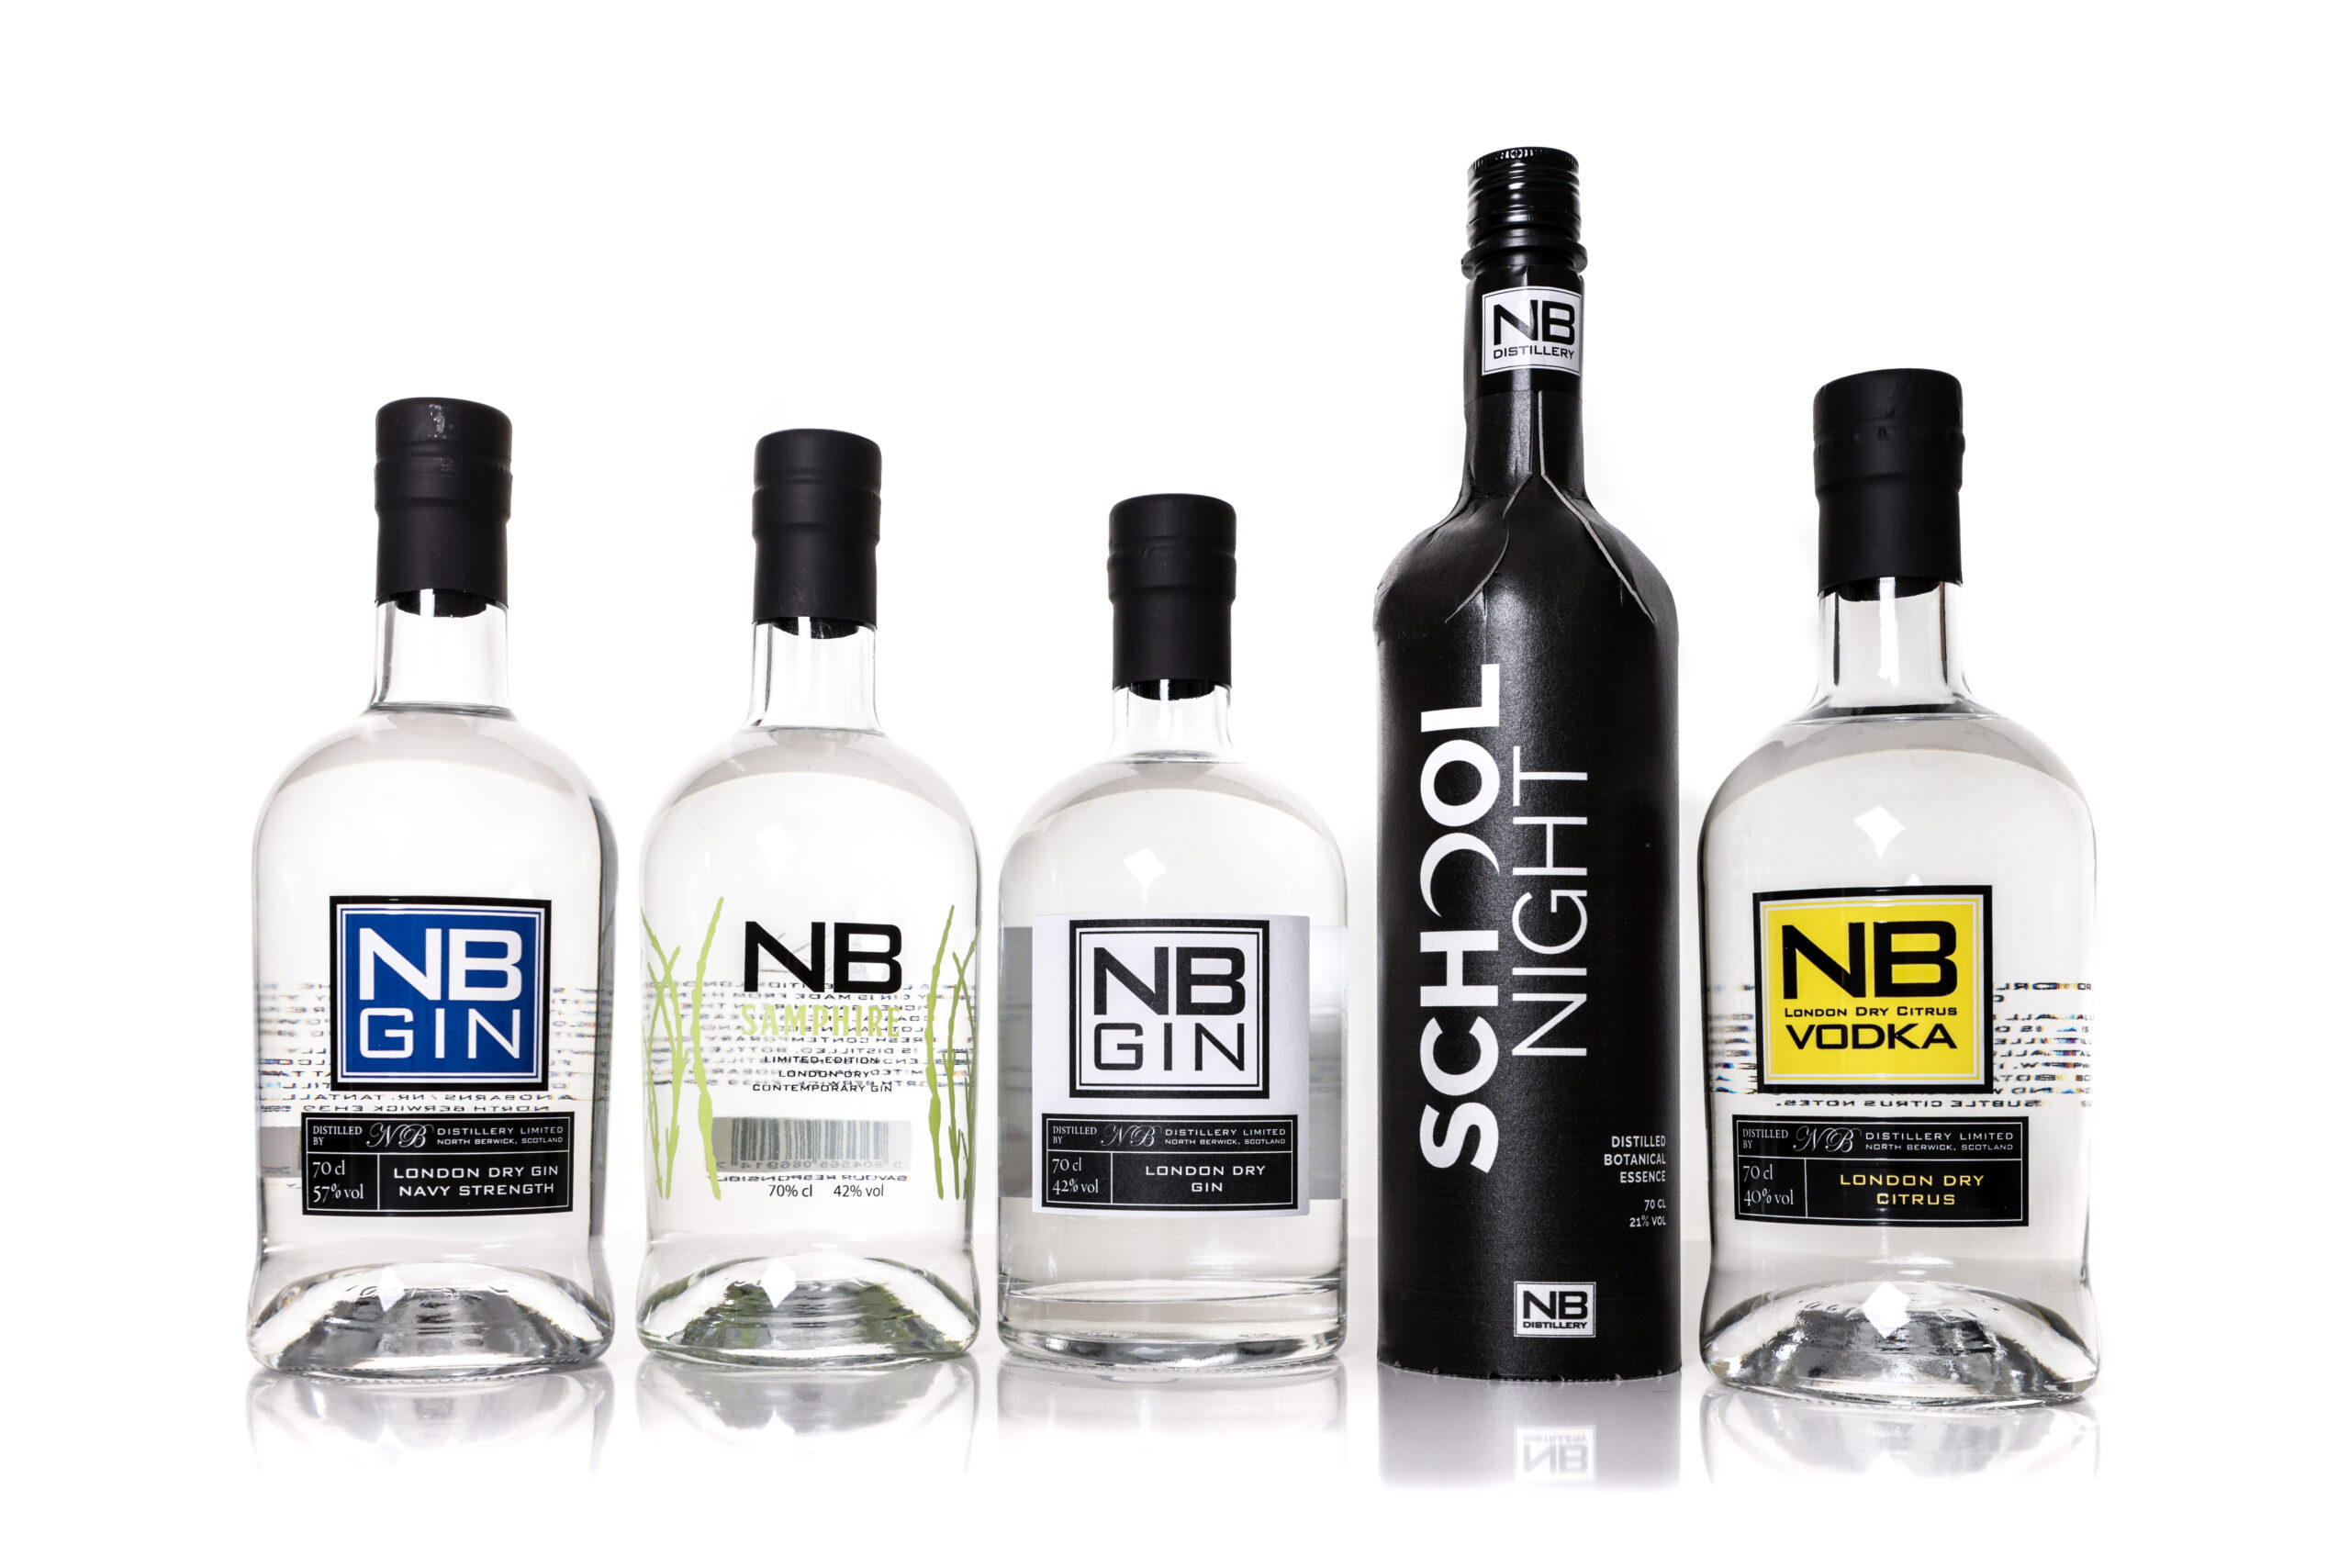 Picture of NB Gin bottles